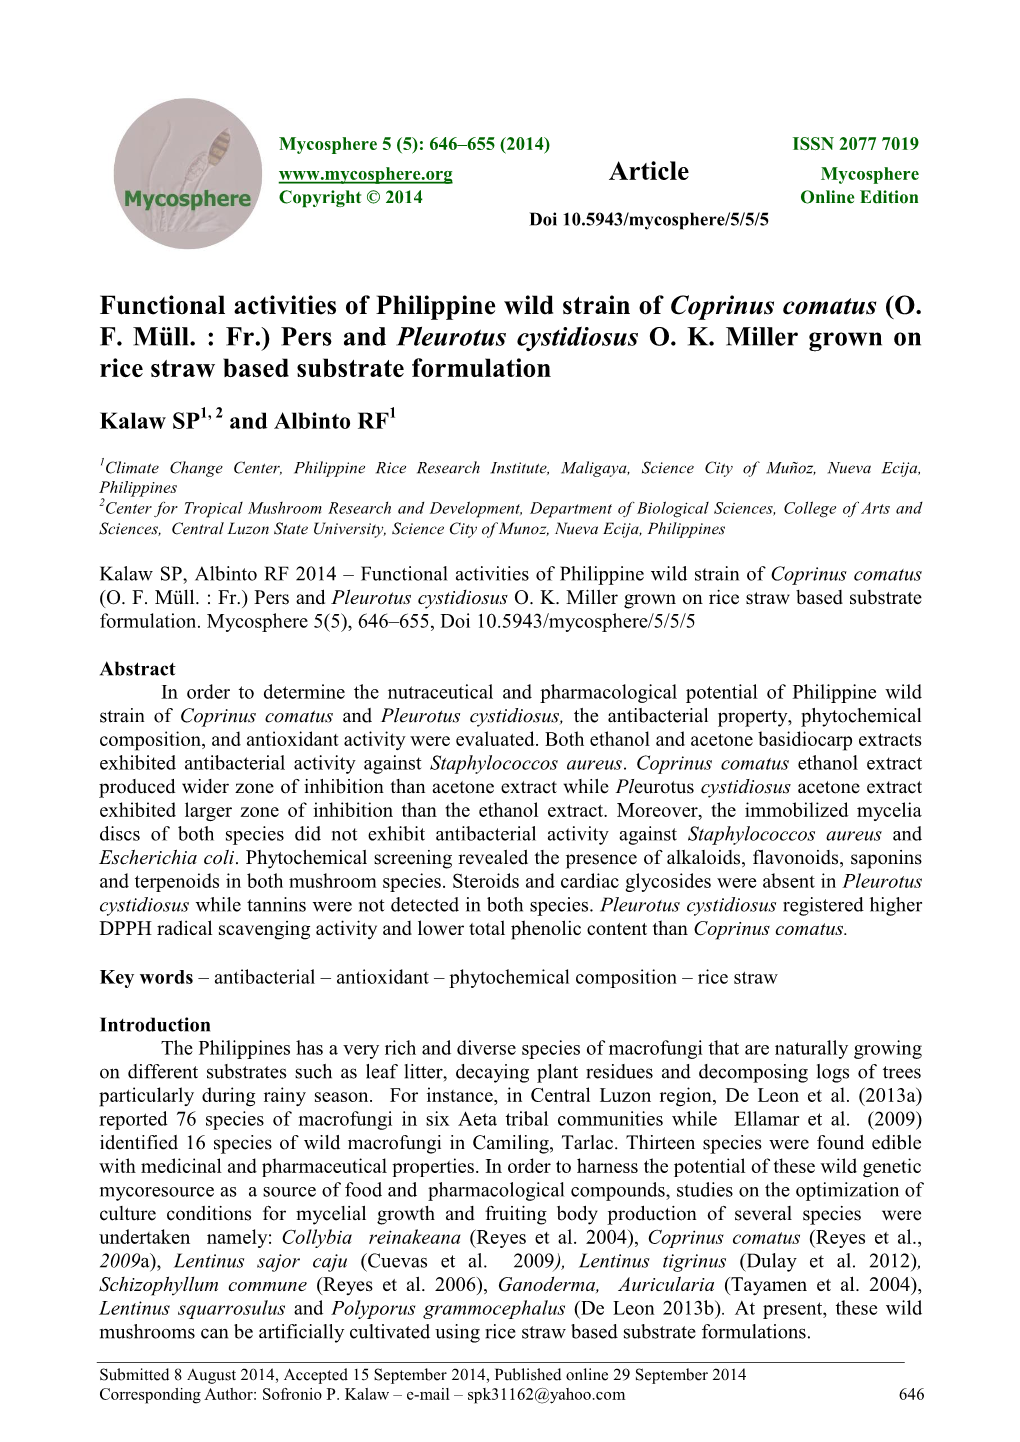 Functional Activities of Philippine Wild Strain of Coprinus Comatus (O. F. Müll